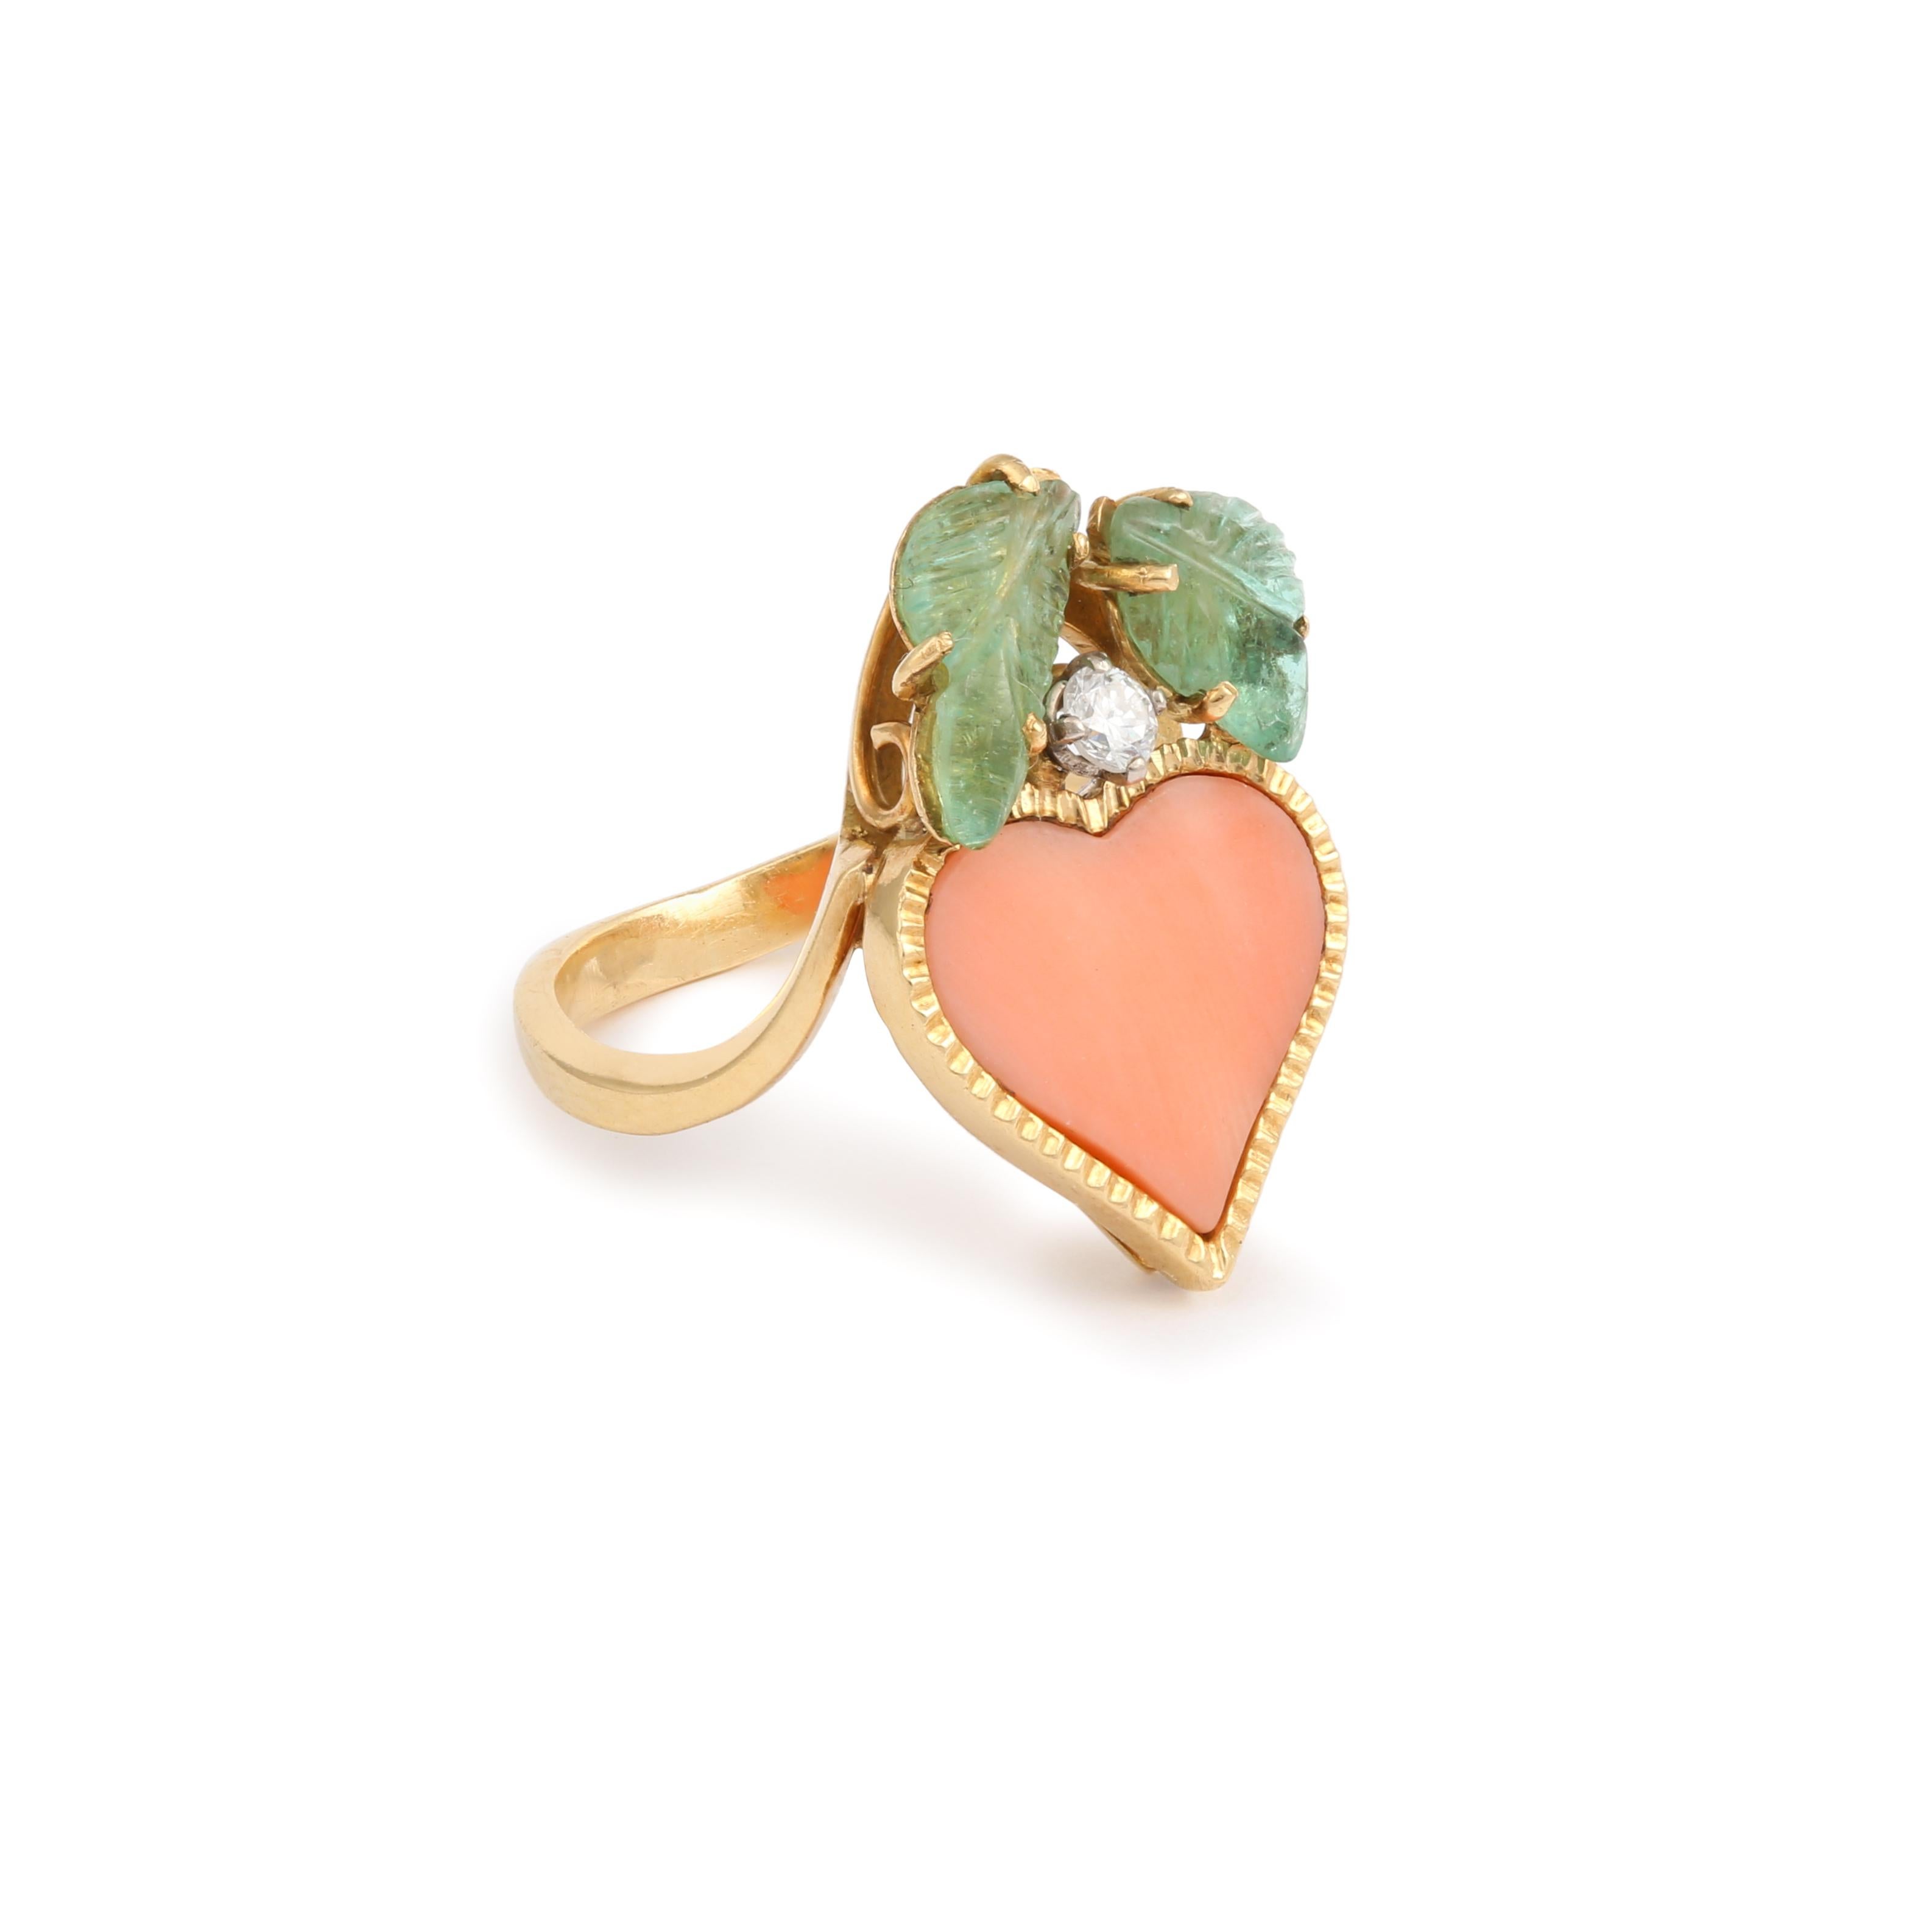 Charming yellow gold heart ring set with a heart-shaped coral topped with emerald leaf cabochons and a diamond.

Total estimated weight of emeralds: 1.60 carats

Estimated diamond weight: 0.08 carats

Dimensions: 22.18 x 14.48 x 5.16 mm (0.873 x